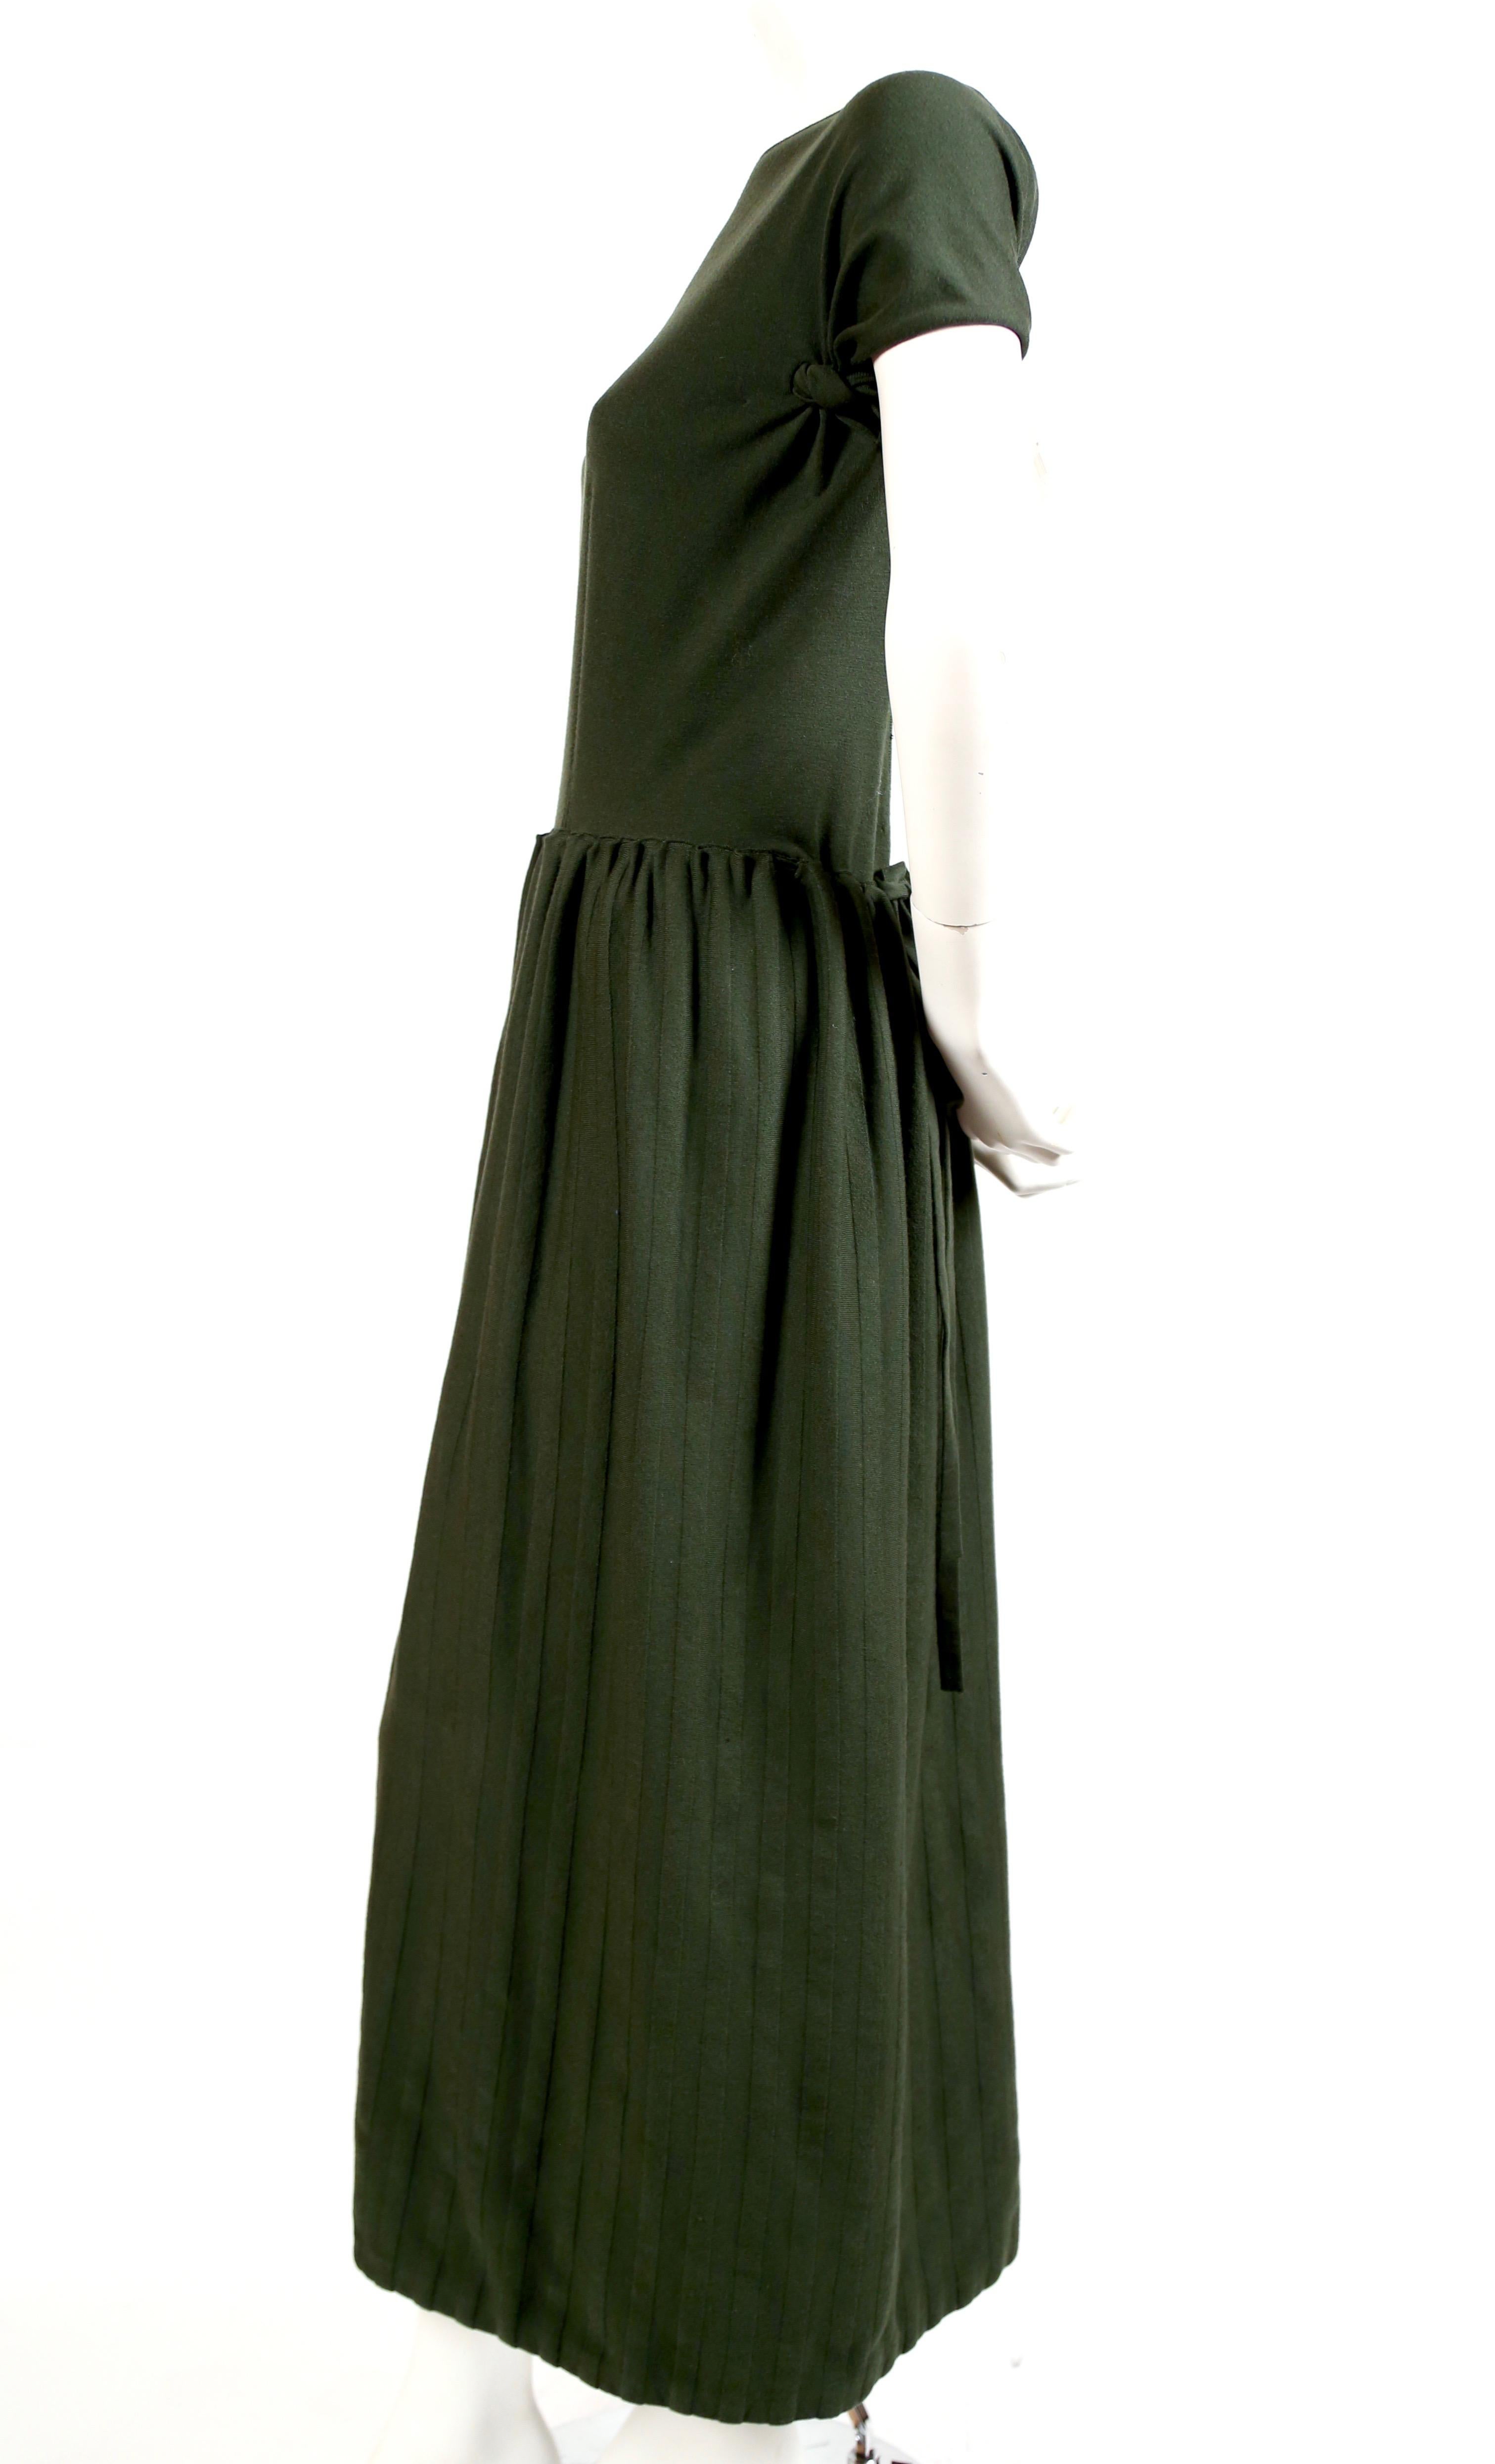 Forest green, knit dress with long striped skirt and open back from Azzedine Alaia dating to the 1990's. Labeled a French size S however there is some flexibility with the sizing due to stretchy knit. Approximately 52